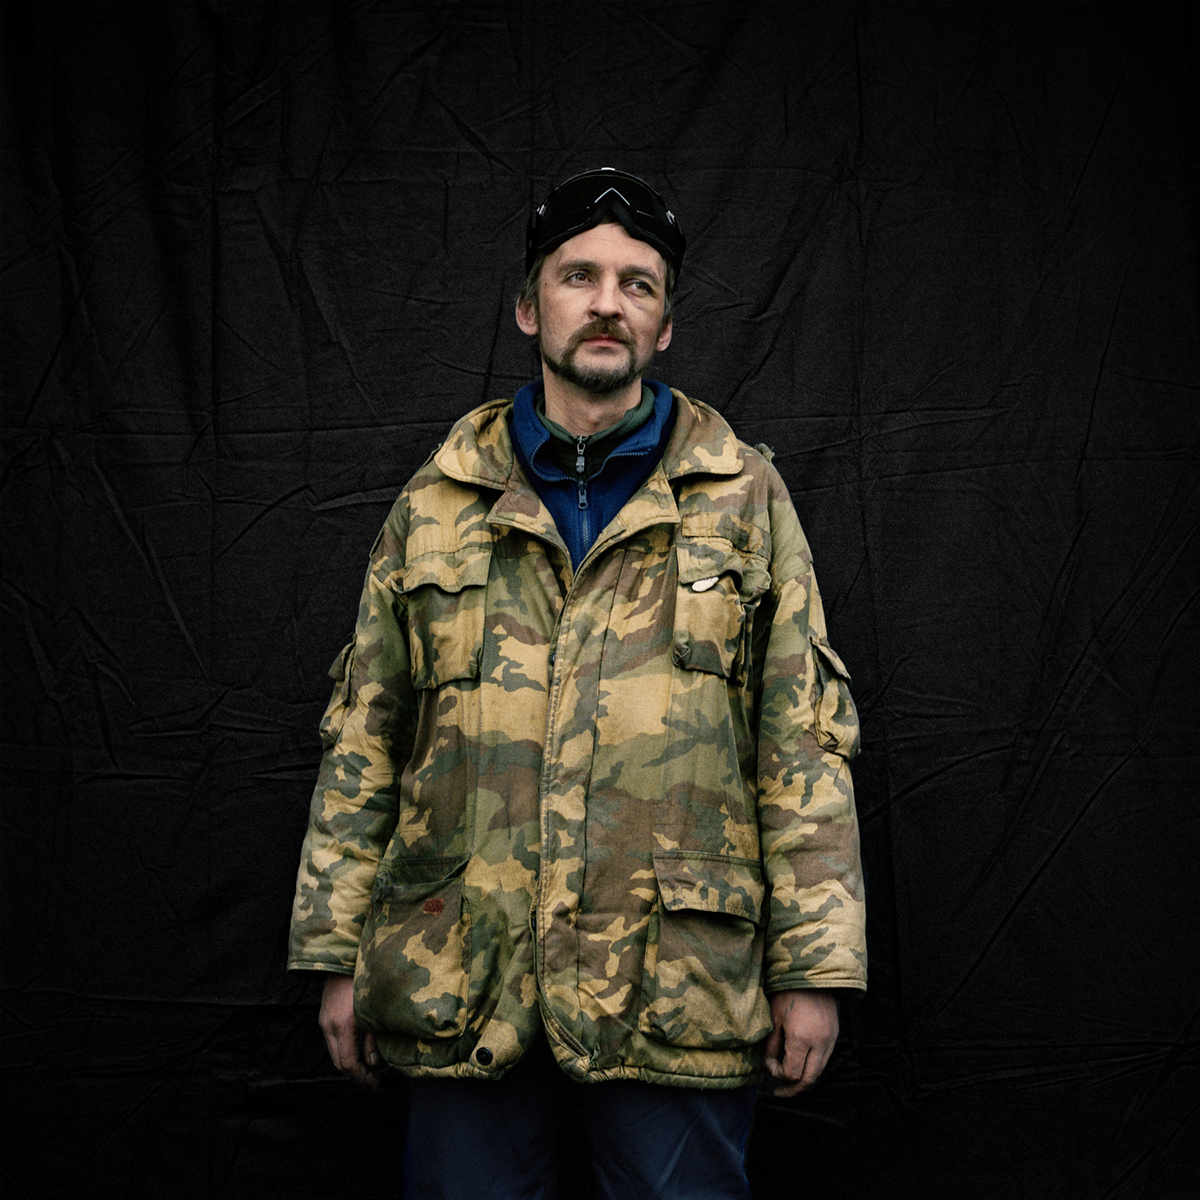 Taylor-Lind photographed Oleg, above, and the other subjects of "Maidan: Portraits from the Black Square" in front the same black backdrop, removing them from the violence of the square